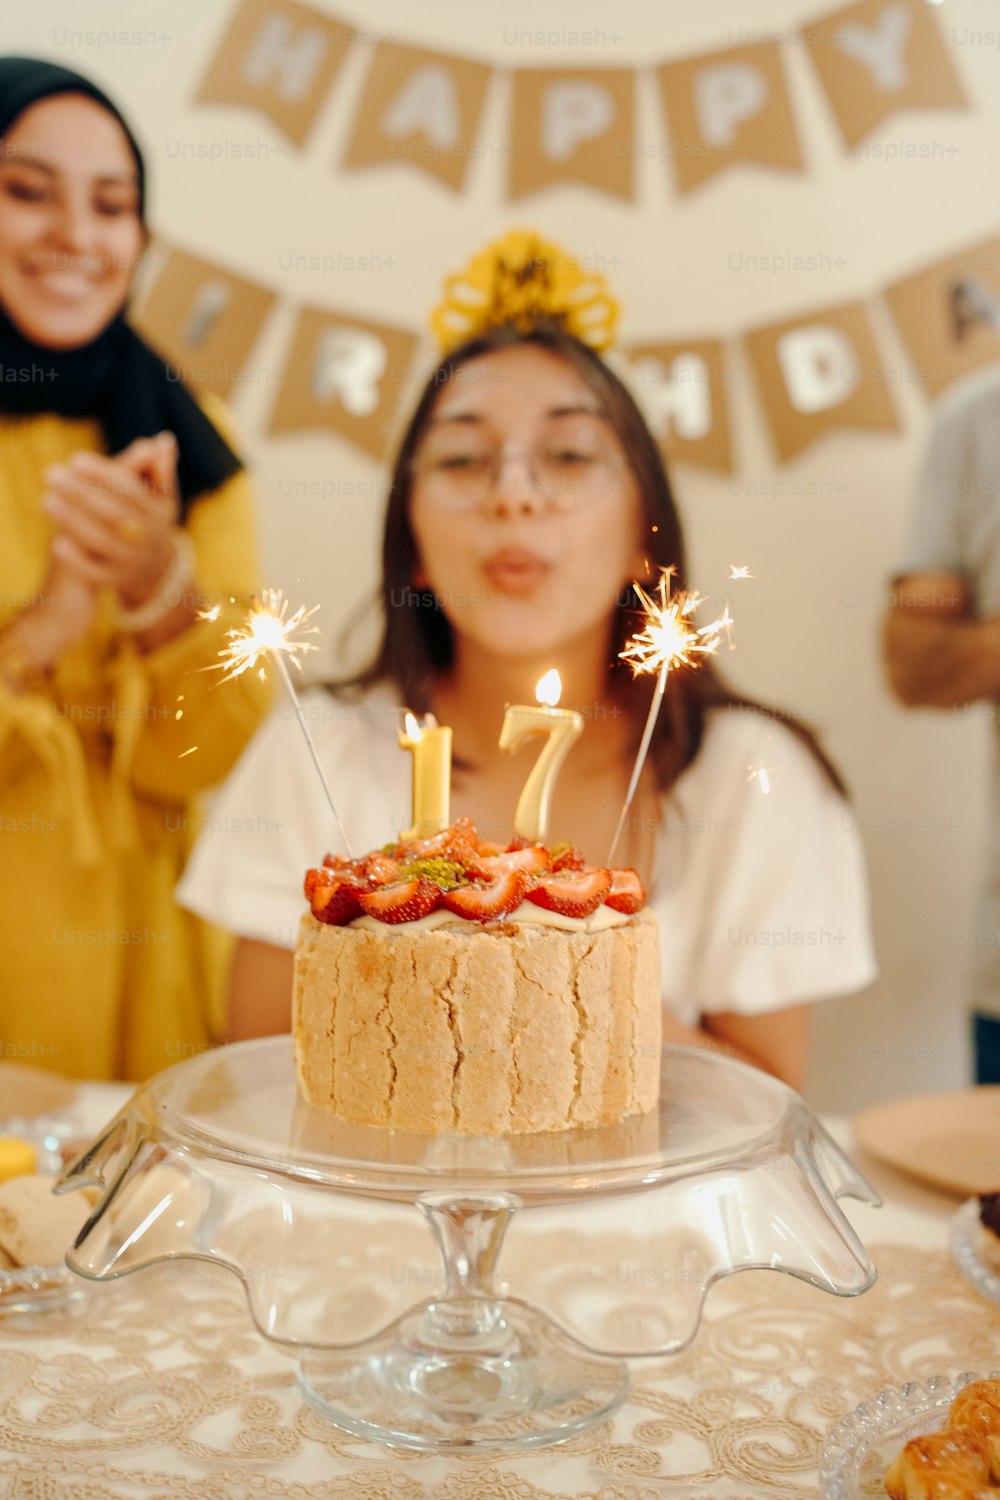 a young girl blowing out candles on a birthday cake